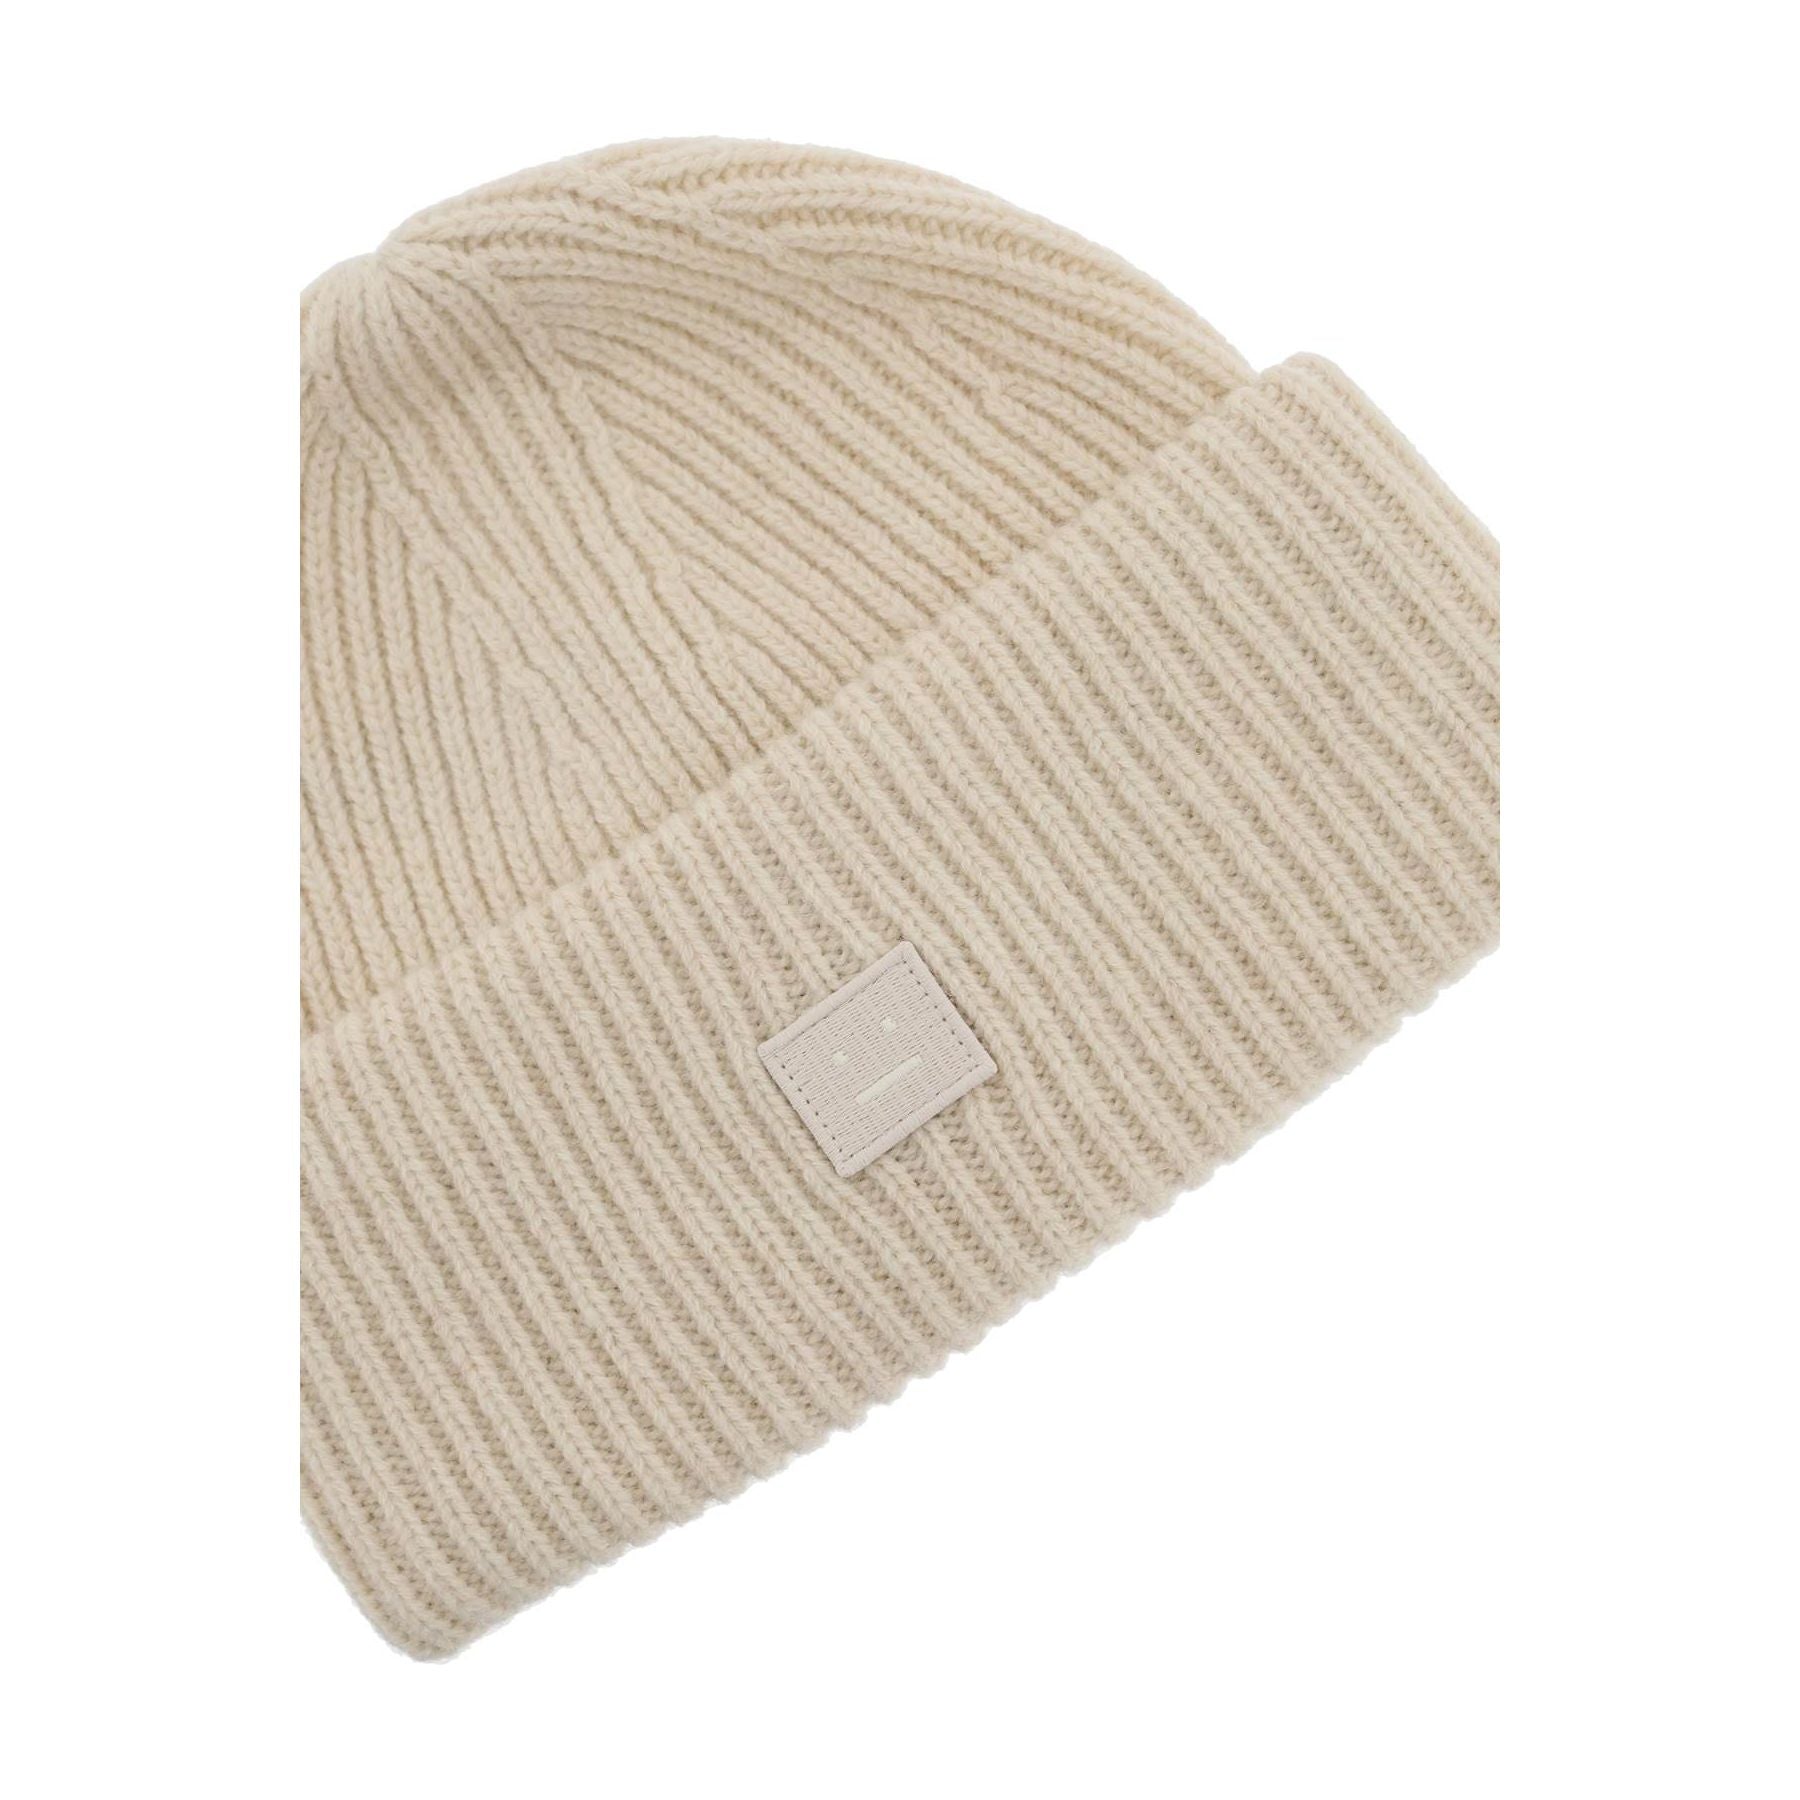 Small Face Patch Wool Knit Beanie Hat